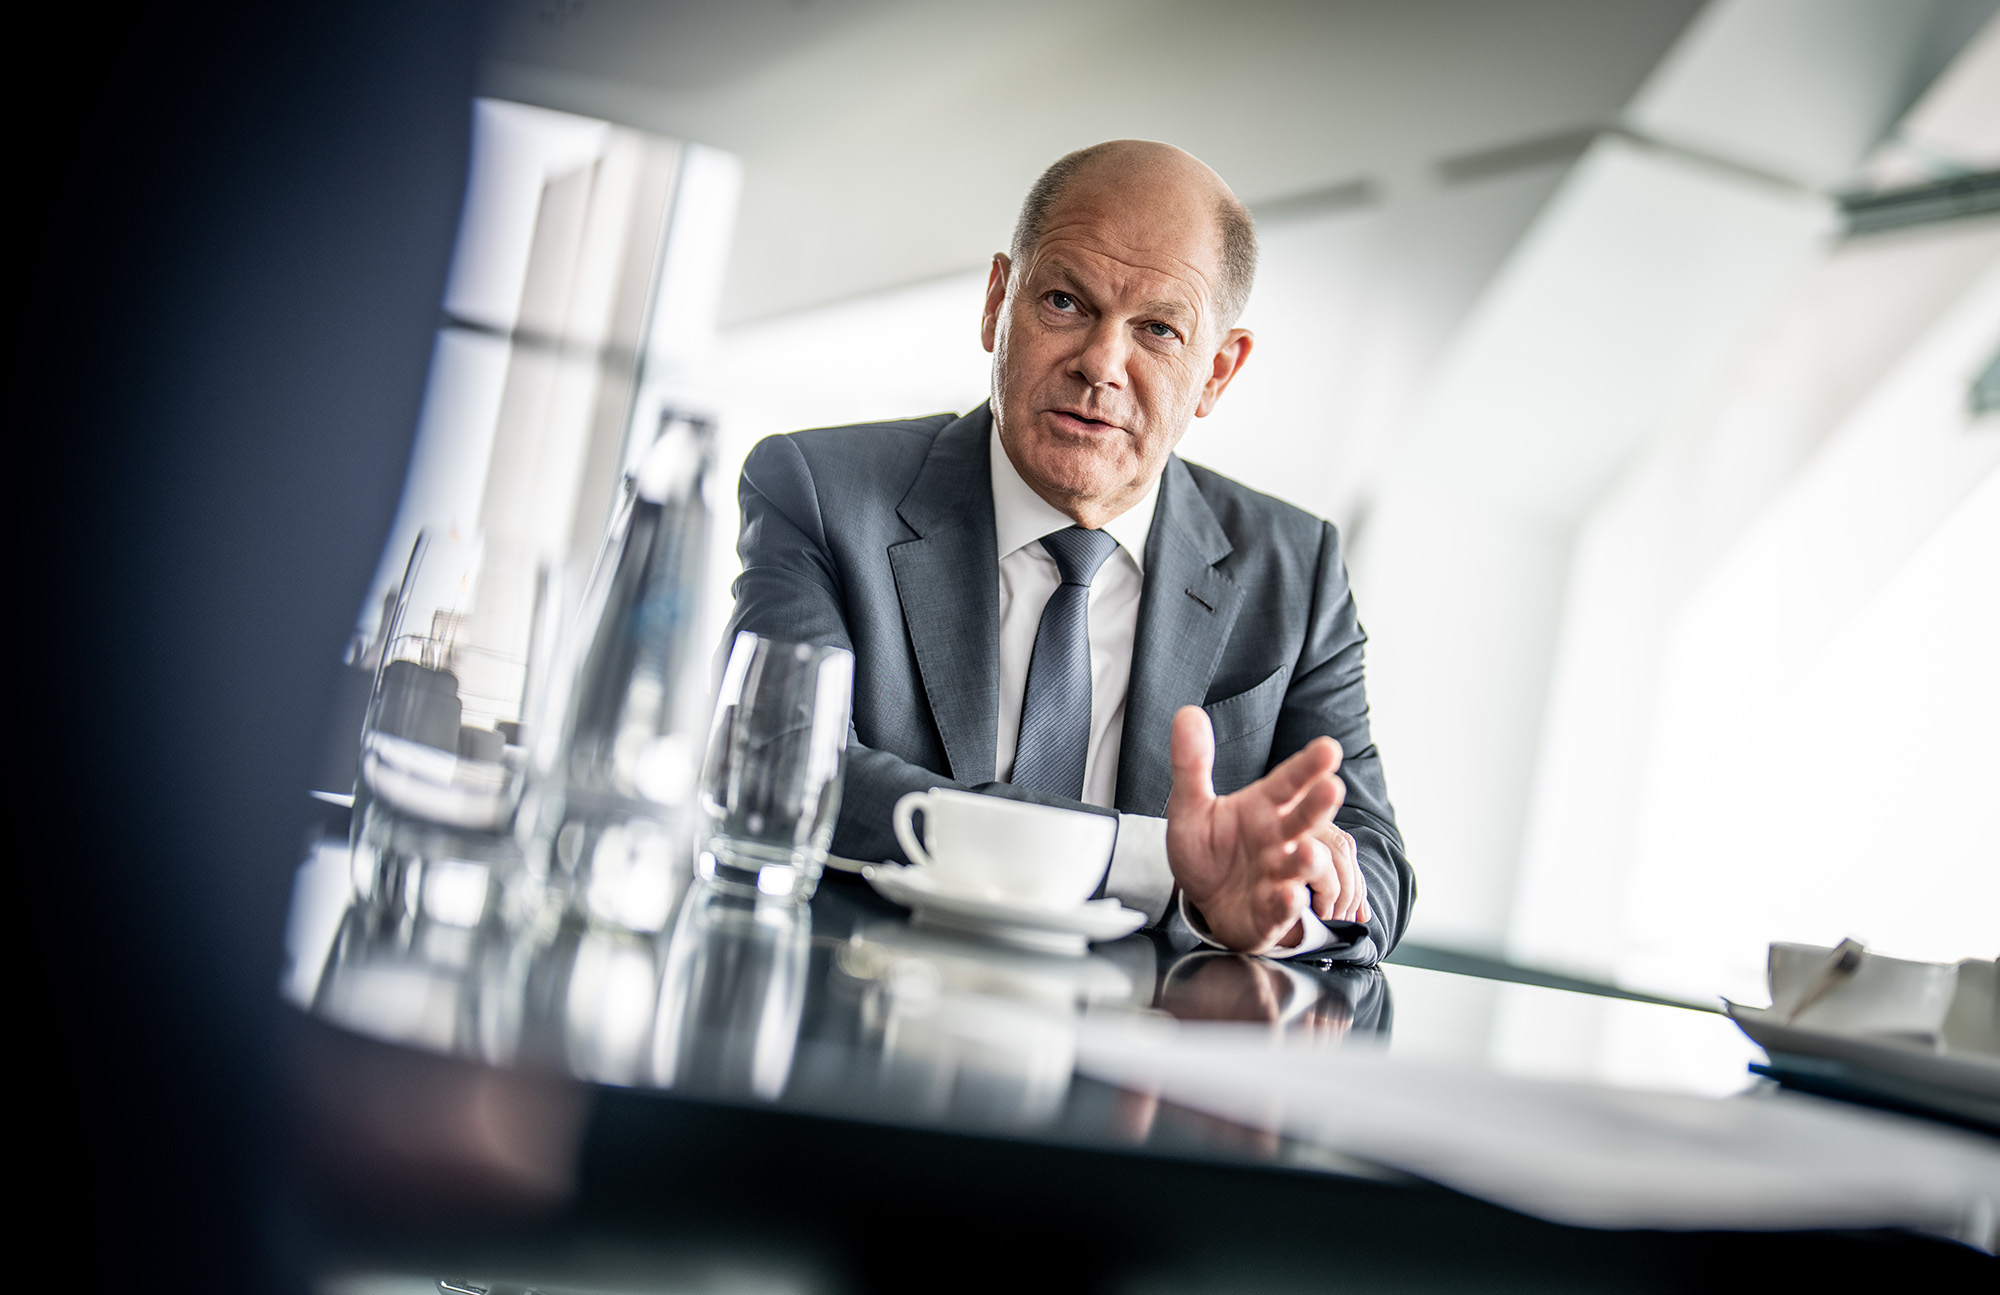 German Chancellor Olaf Scholz gives an interview in Berlin, Germany, on June 17